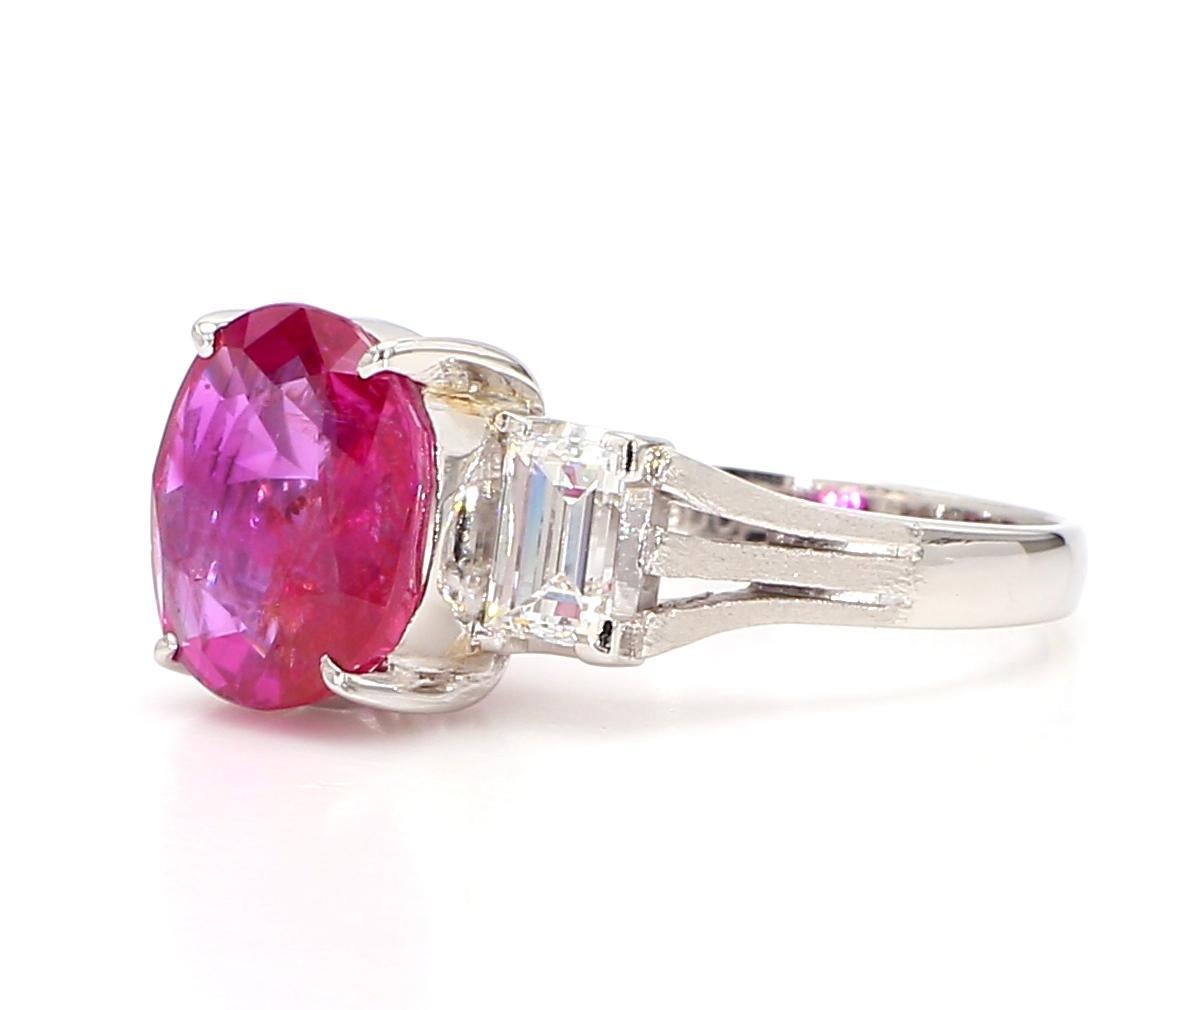 This stunning 3 carat Ruby and Diamond ring is a true statement piece that exudes elegance and luxury. The centerpiece of the ring is a vibrant 3-carat oval-cut ruby that is surrounded by a halo of sparkling round-cut diamonds, creating a dazzling